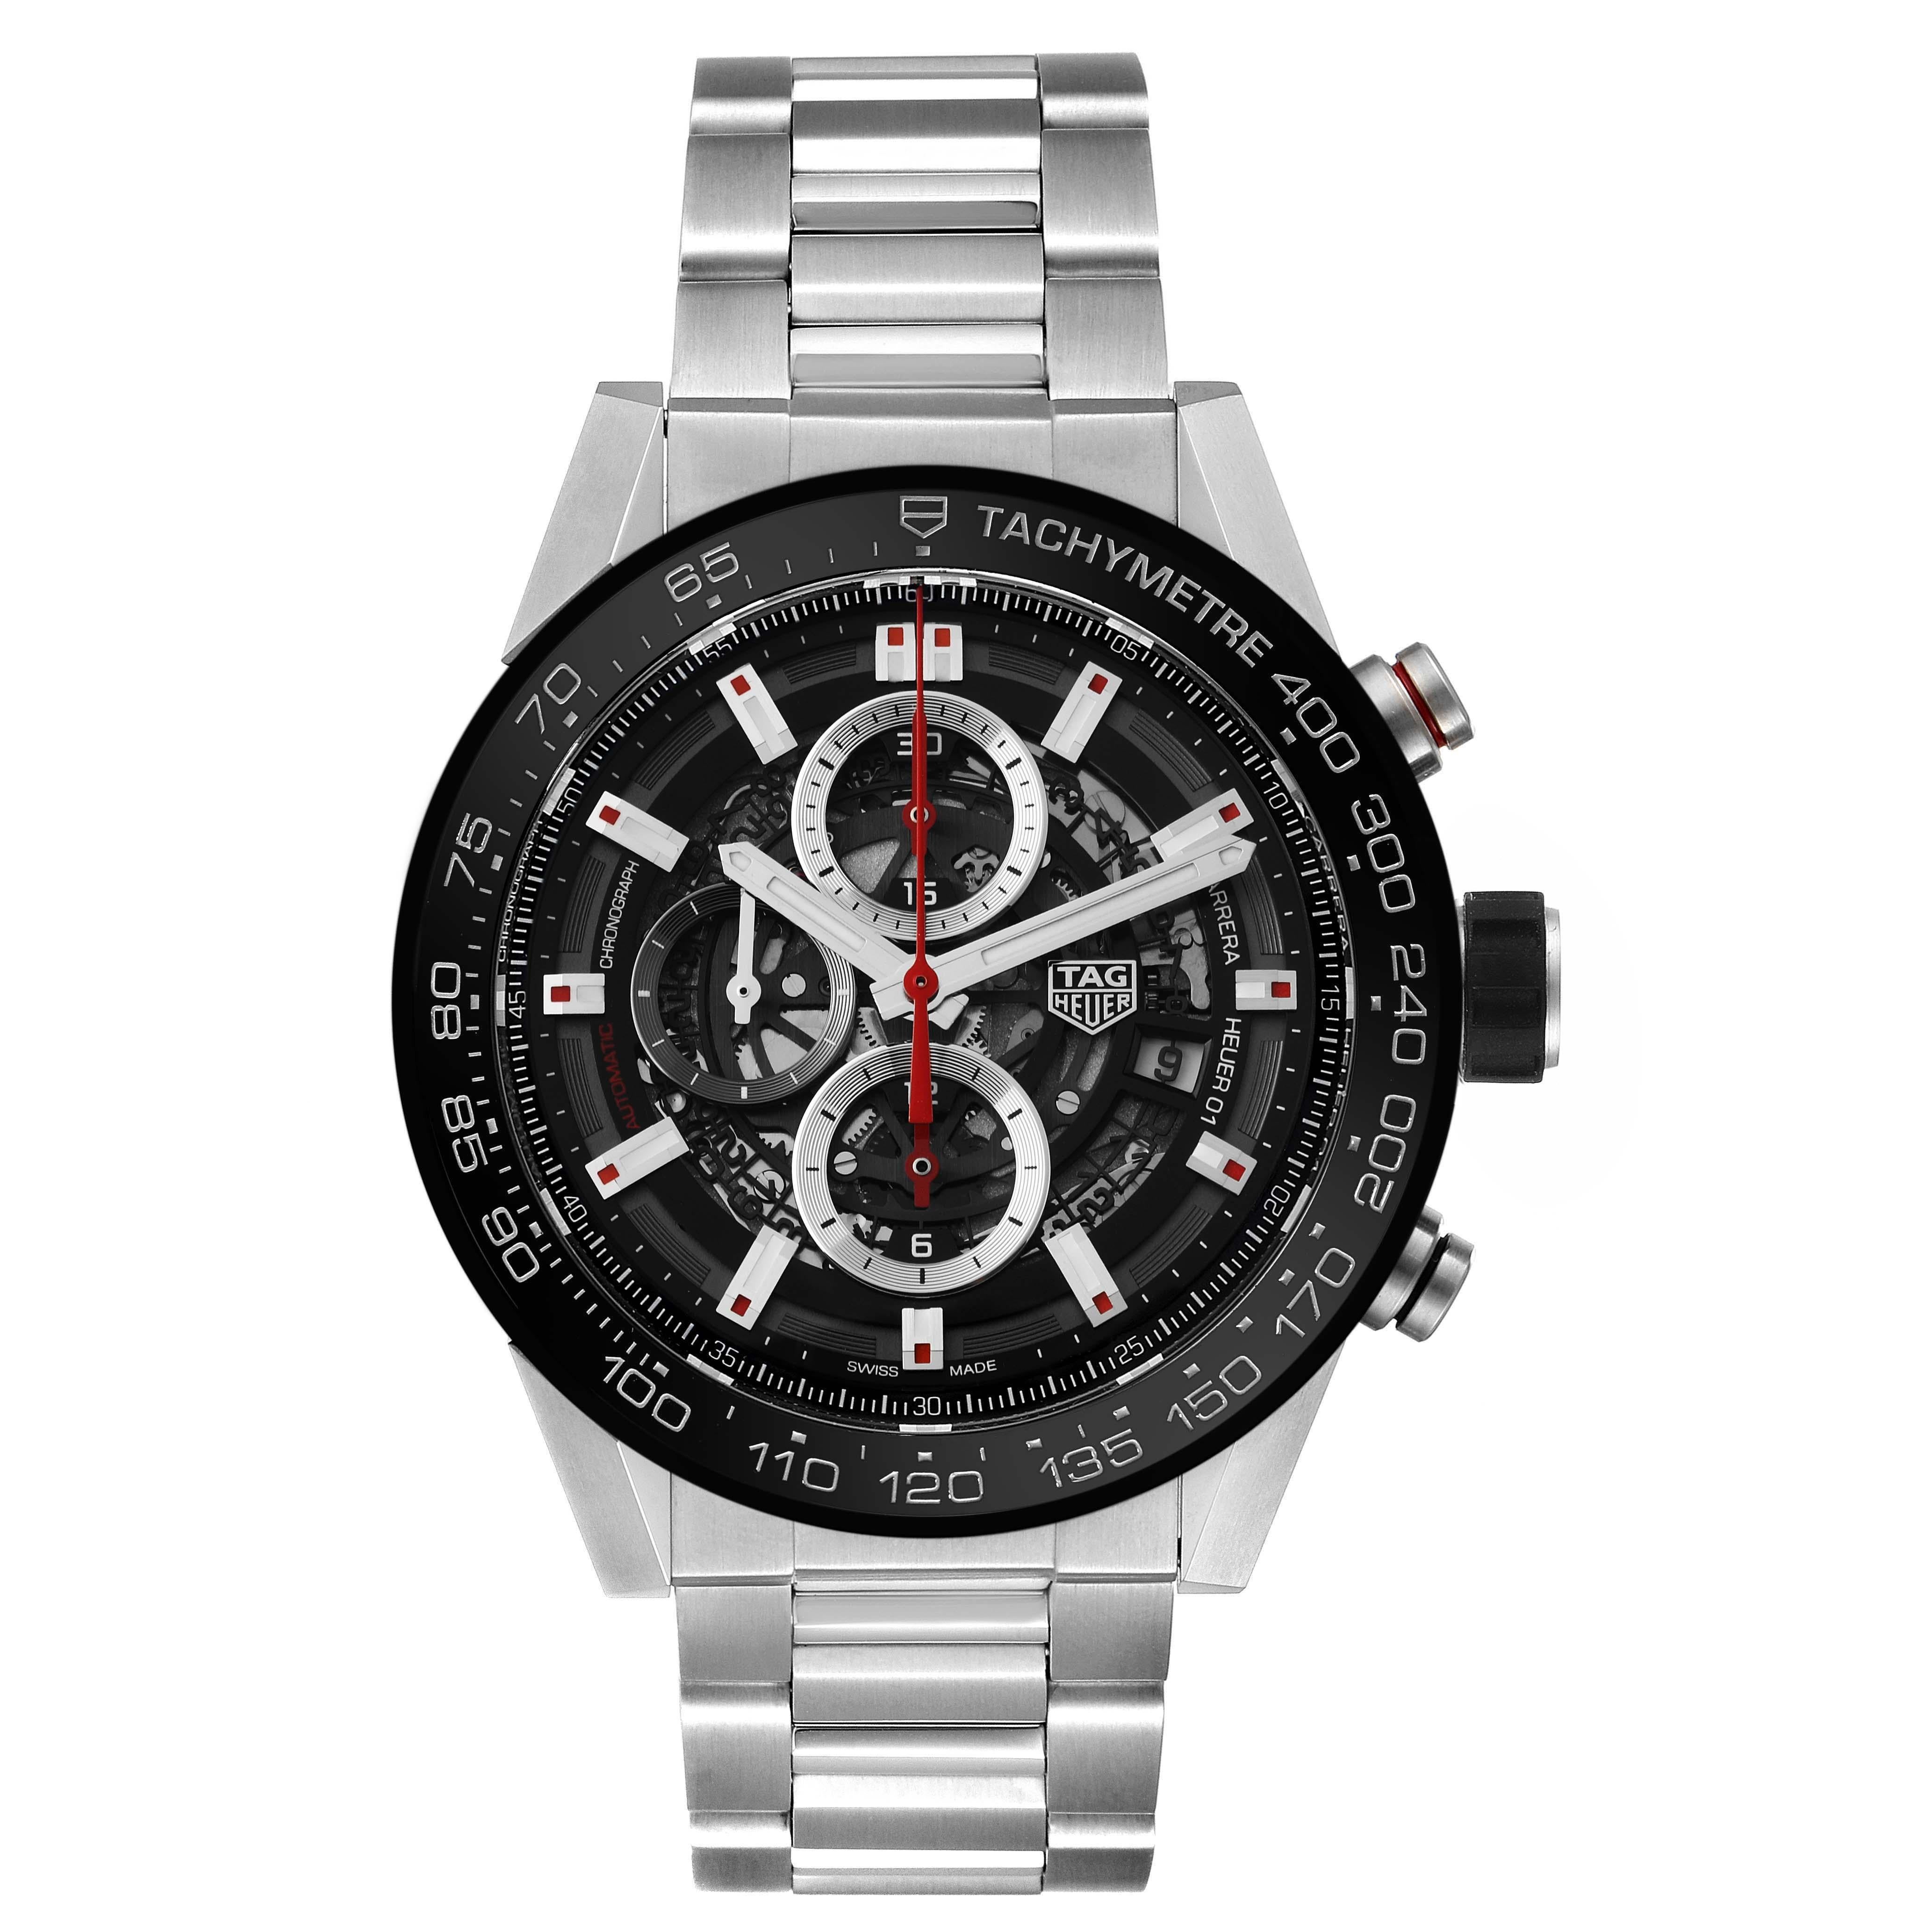 Tag Heuer Carrera Skeleton Dial Chronograph Steel Mens Watch CAR2A1W Box Card. Automatic self-winding chronograph movement. Stainless steel case 45.0 mm in diameter. Transparent exhibition sapphire crystal case back. Black bezel with tachymeter